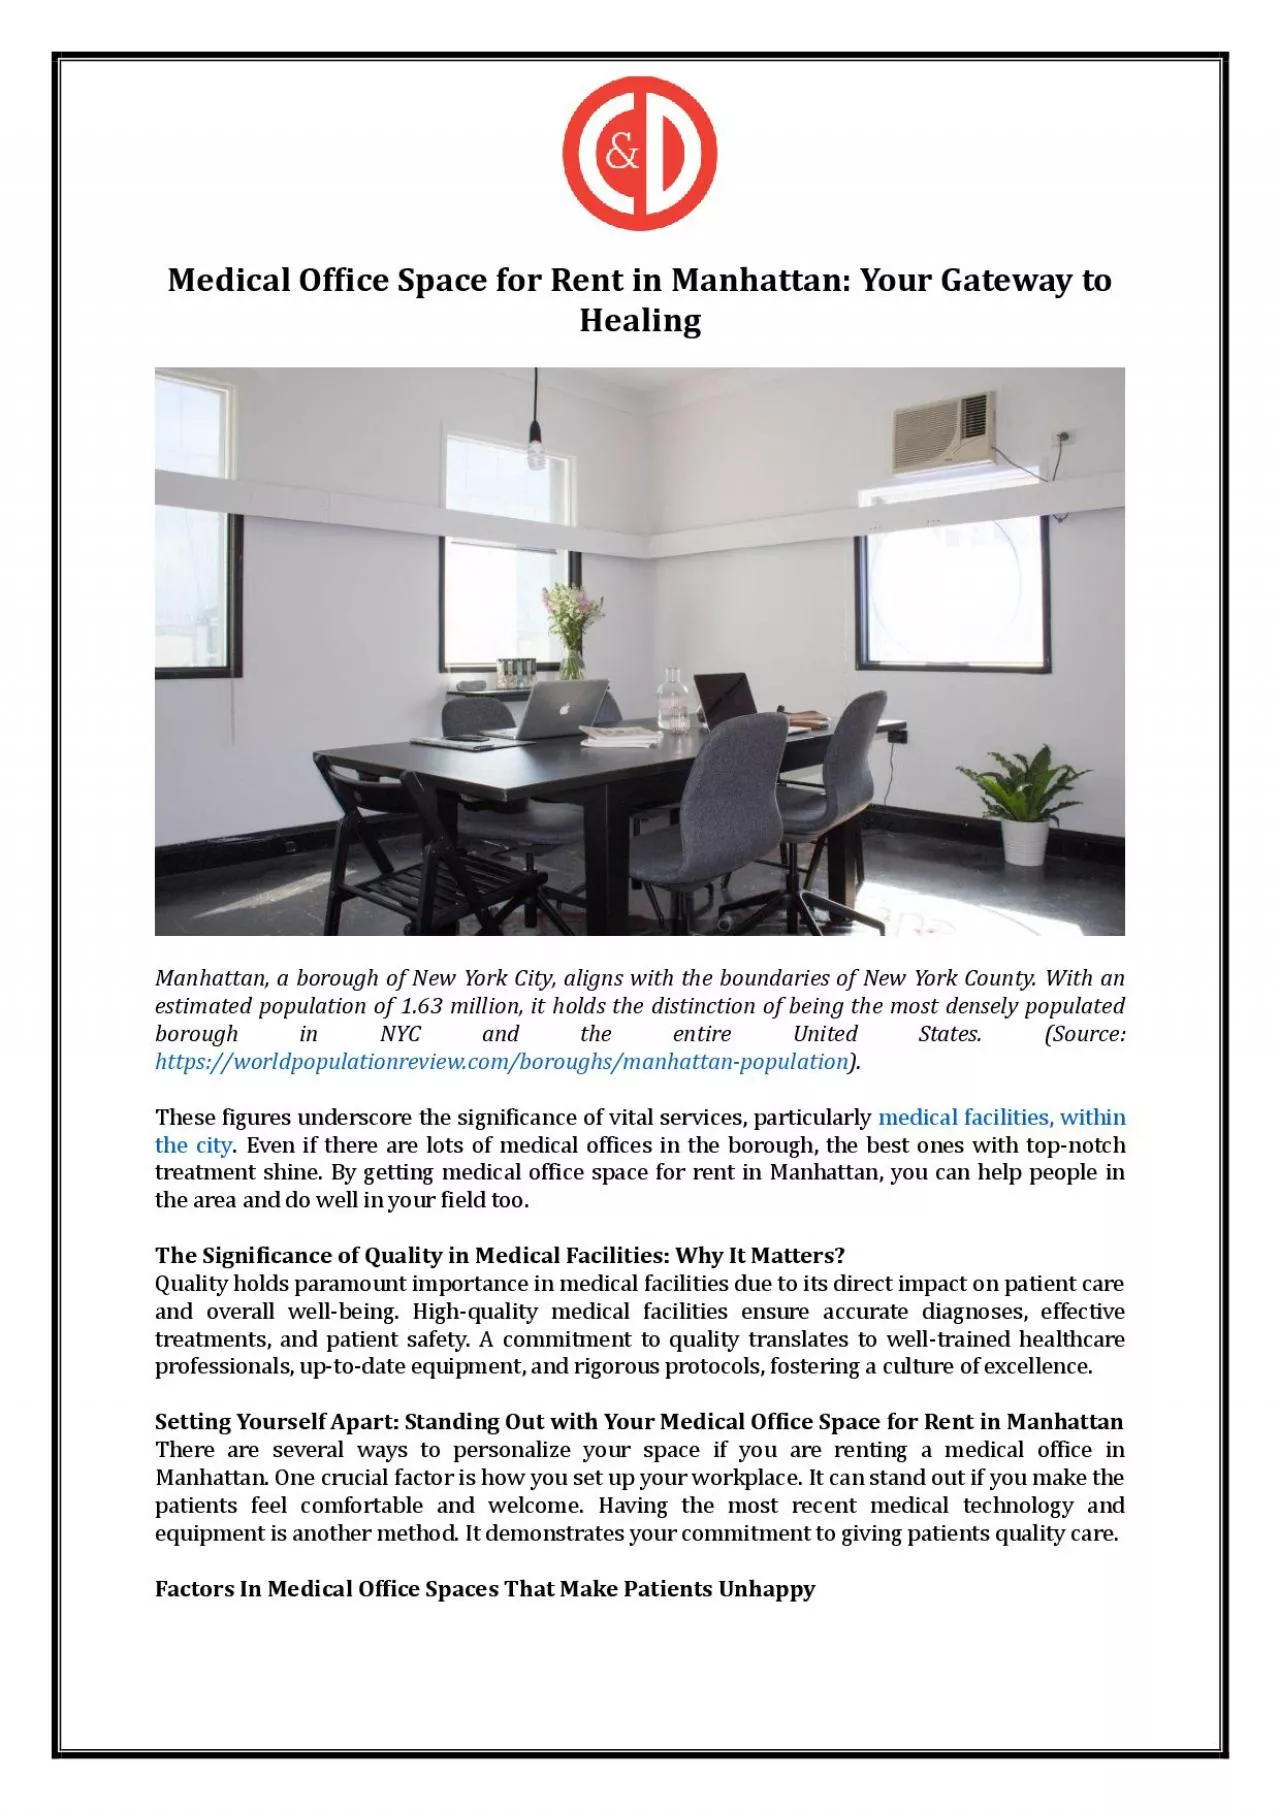 Corbett & Dullea Real Estate - Medical Office Space for Rent in Manhattan: Your Gateway